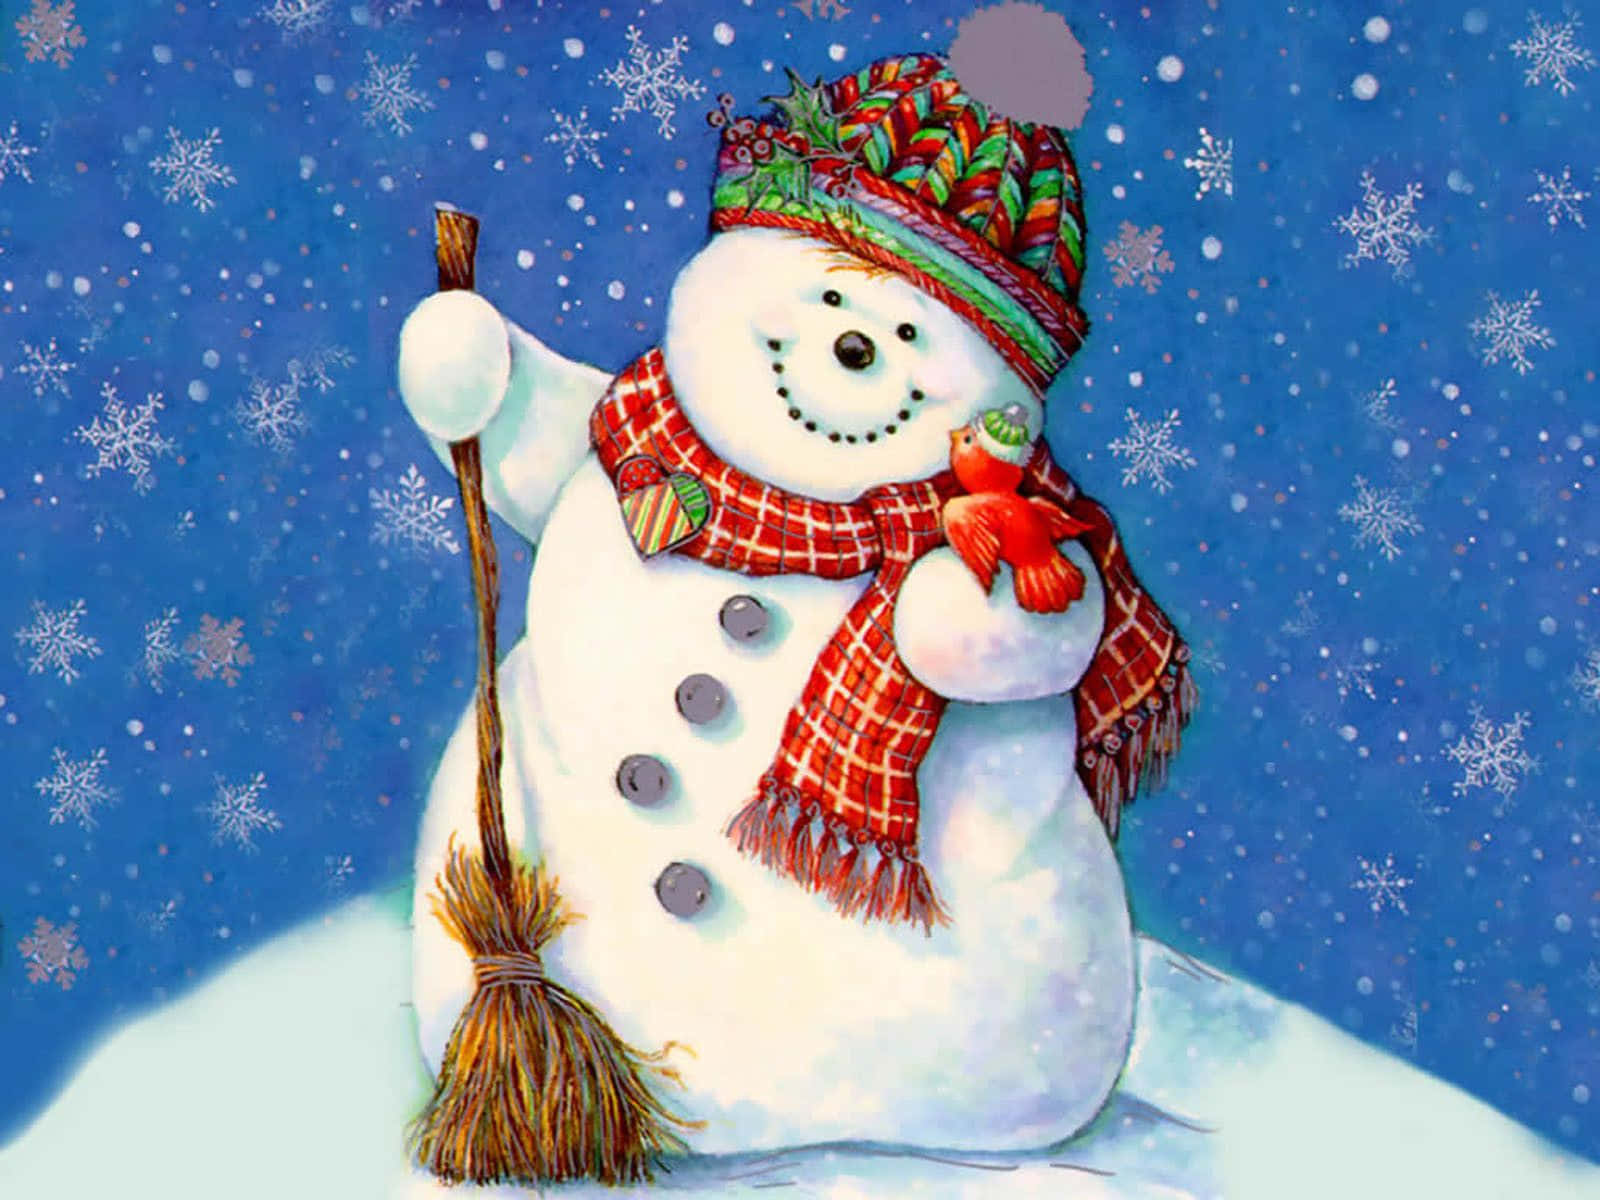 A happy snowman in front of the Christmas tree, spreading joy and laughter Wallpaper